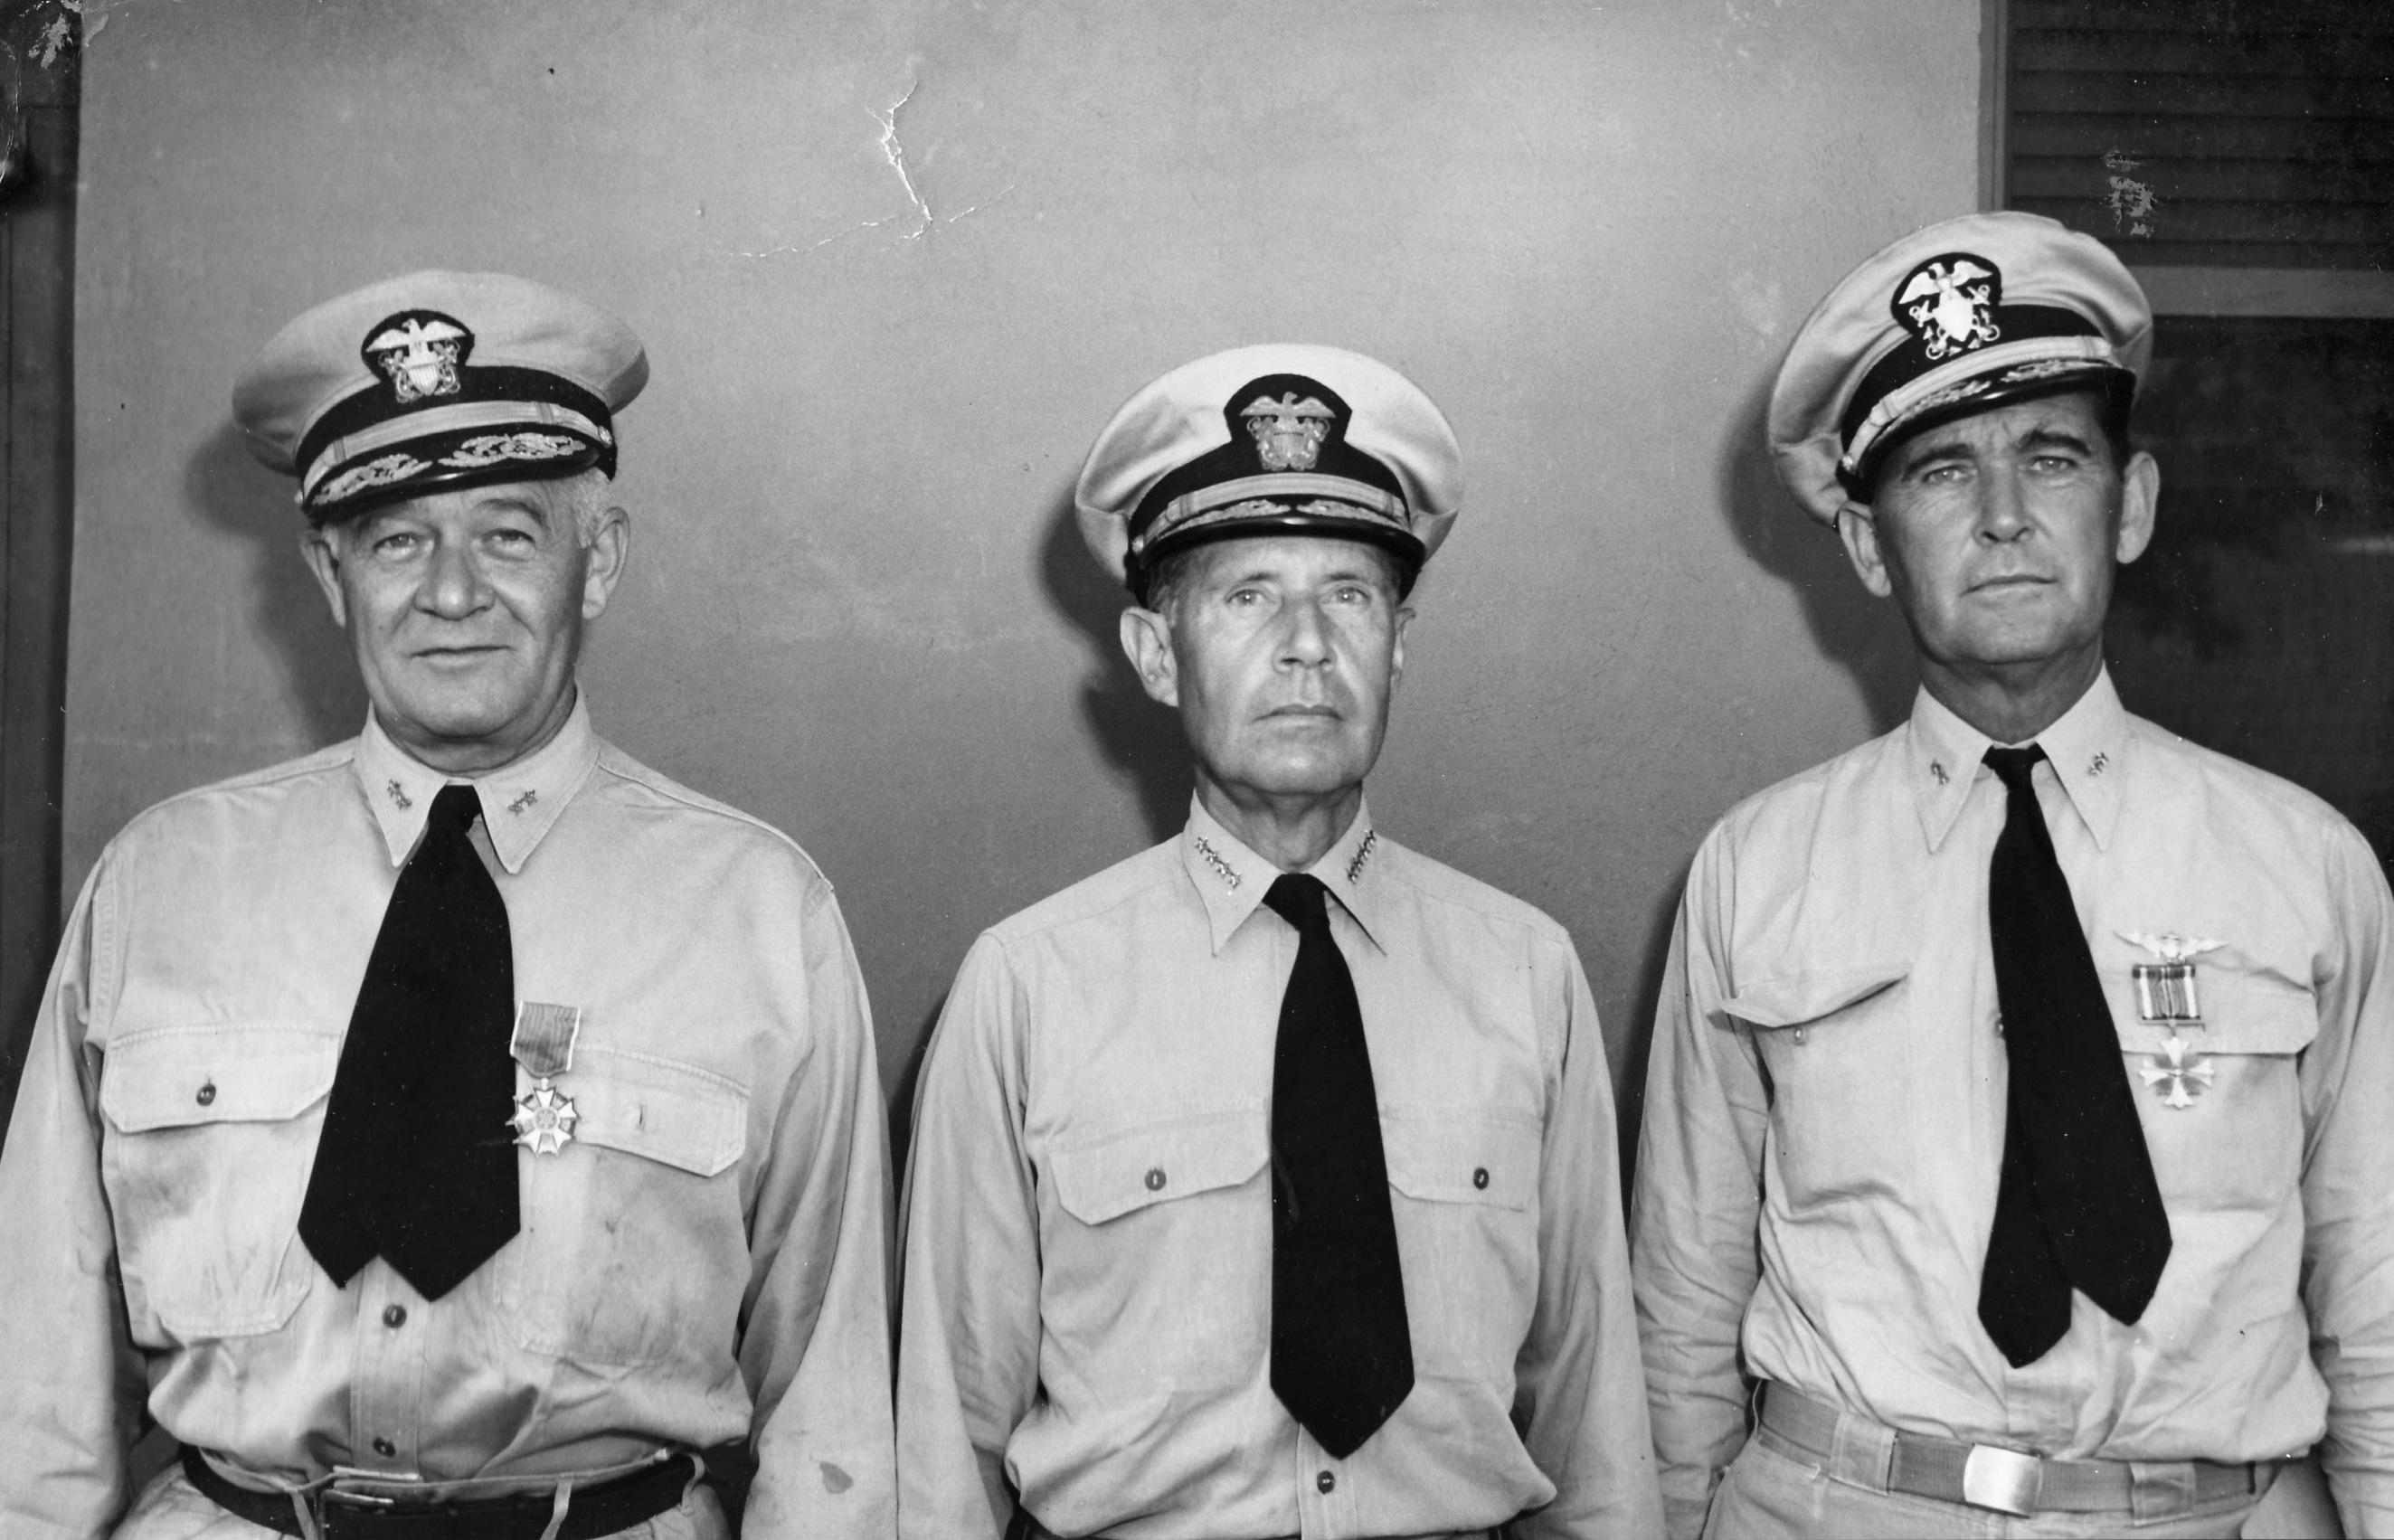 Admiral Raymond Spruance with the day’s two honorees, Rear Admiral Robert Giffen who had just received the Legion of Merit and Rear Admiral John Dale Price who had just received the Distinguished Flying Cross, early 1944